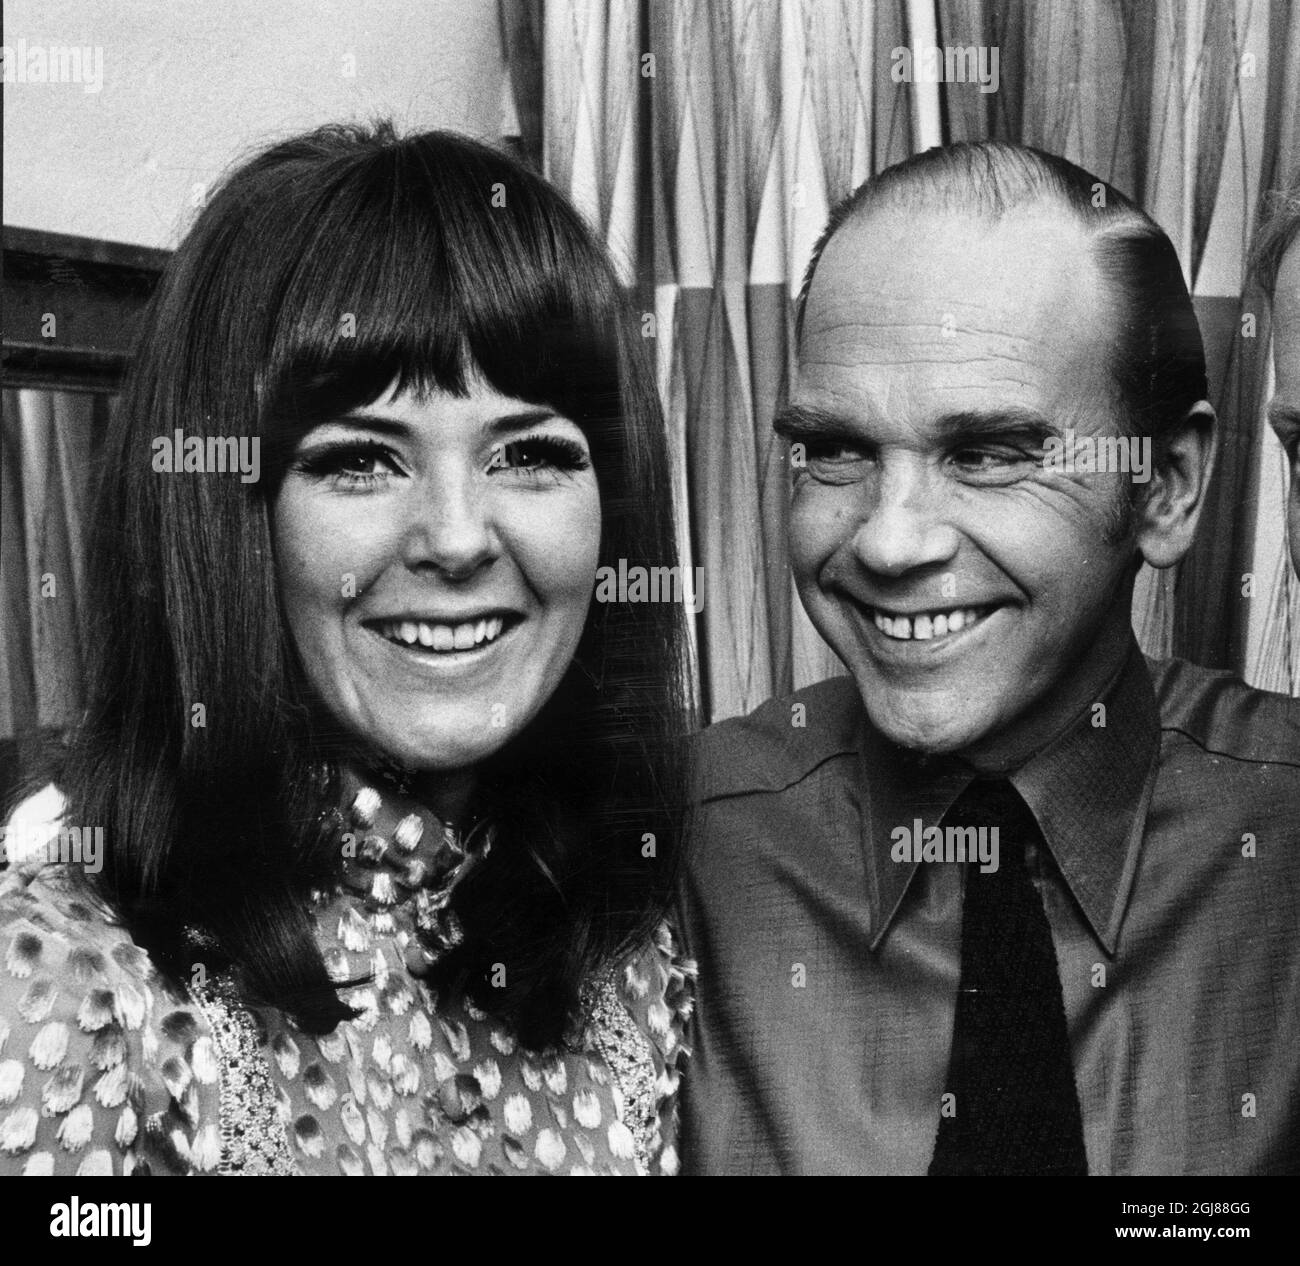 ARKIV 1969 - Vocalist Anni-Frid Lyngstad (Abba Frida) together with pianist Charlie Norman at Hamburger Bors Dinner Show in Stockholm on 22 April 1969, after touring the country with 'Charlie Norman Show'. Photo: Sven Asberg / SCANPIX / Kod: 4120  Stock Photo